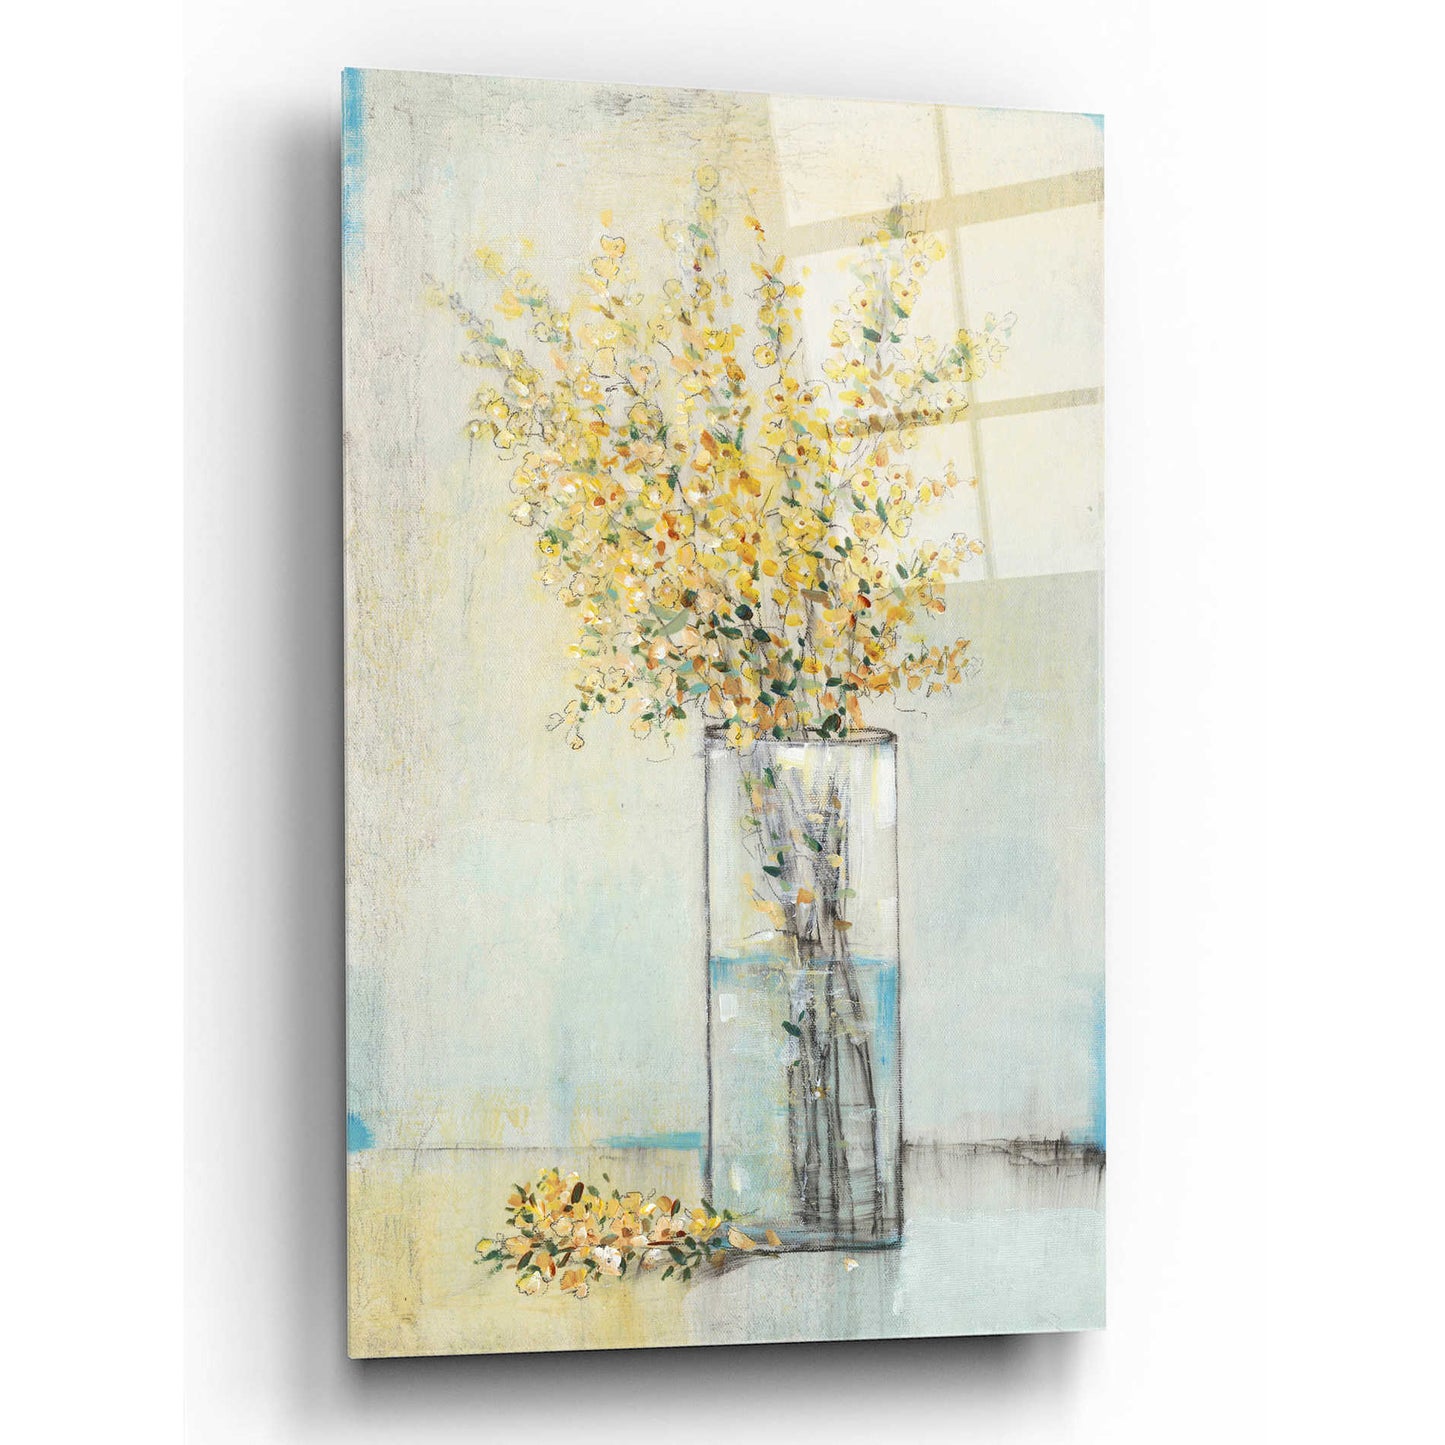 Epic Art 'Yellow Spray in Vase I' by Tim O'Toole, Acrylic Glass Wall Art,12x16